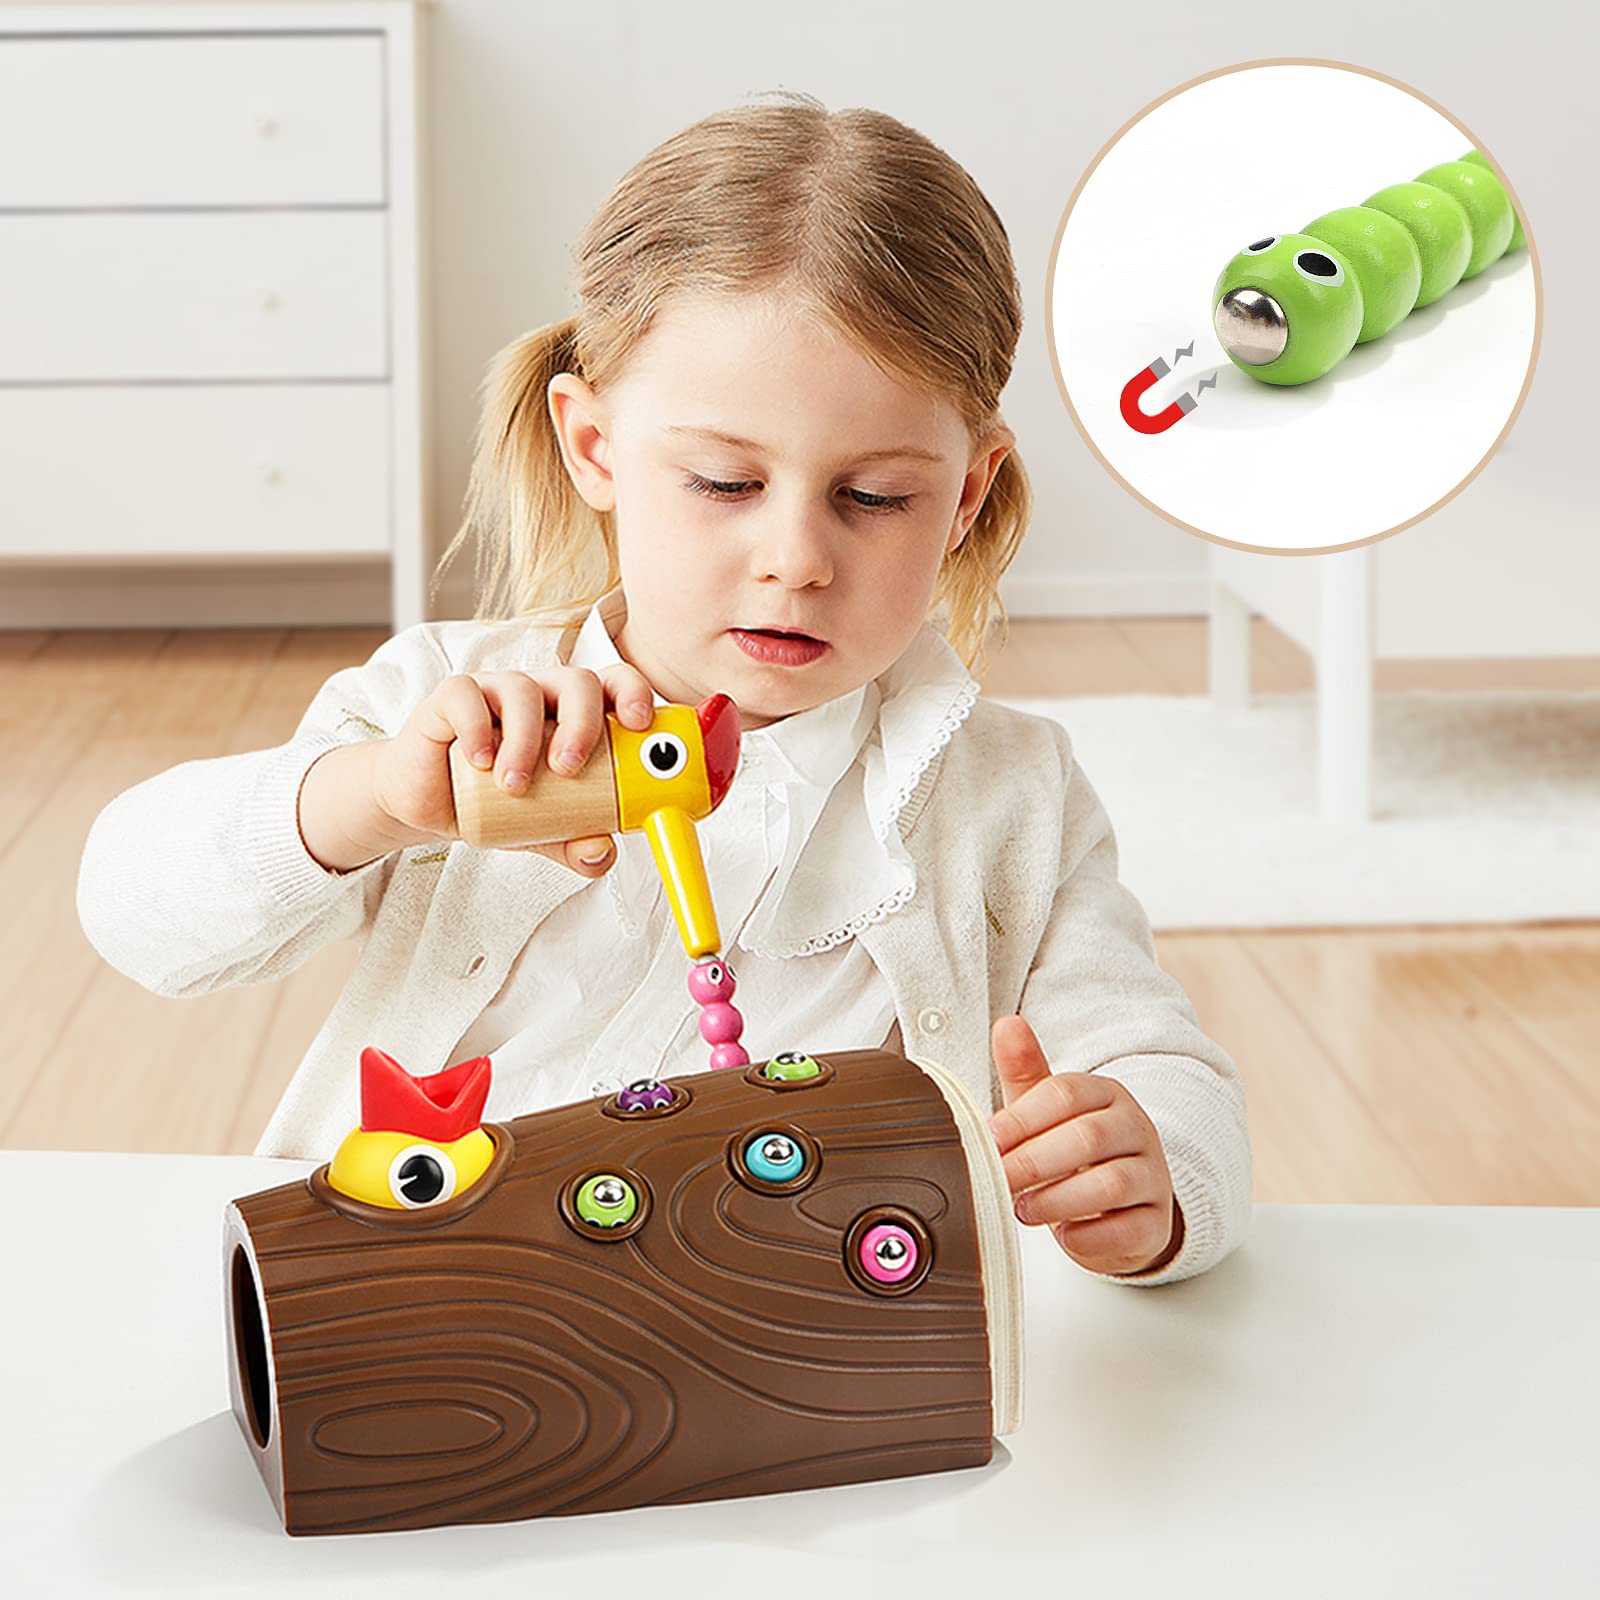 TOP BRIGHT Fine Motor Skills Toy for 2 3 Year Olds Girls and Boys Gifts - Montessori Toddlers Toy Magnetic Game, Sensory, Feeding, Preschool Learning Toys - Hungry Woodpecker Toy